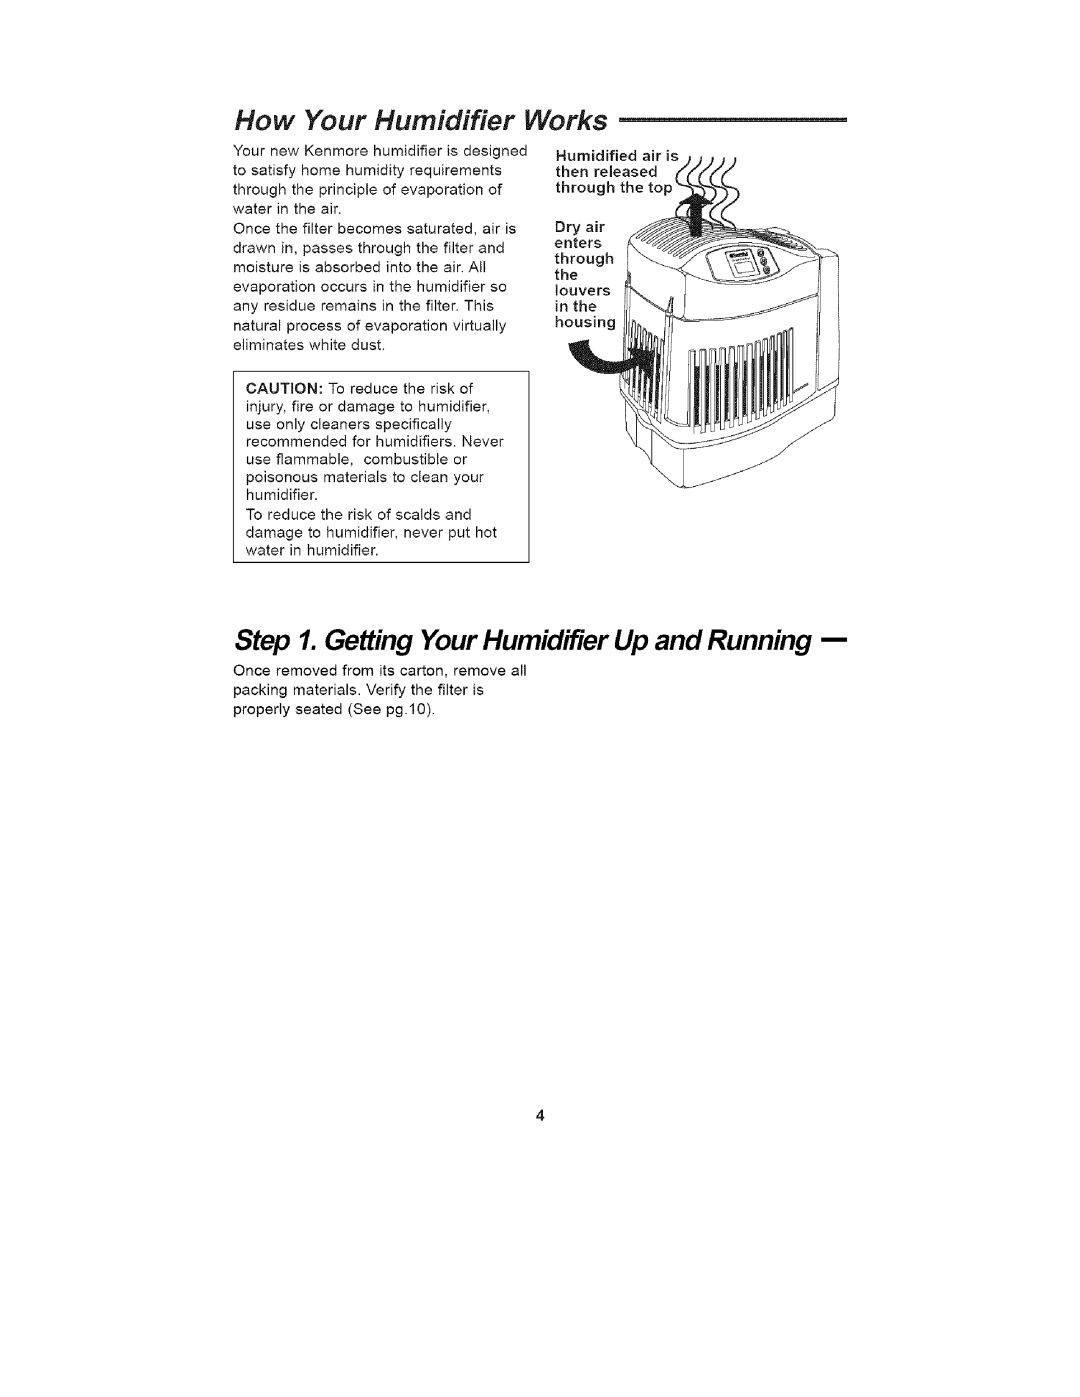 Kenmore 758.15408 manual How Your Humidifier Works, Getting Your Humidifier Up and Running 